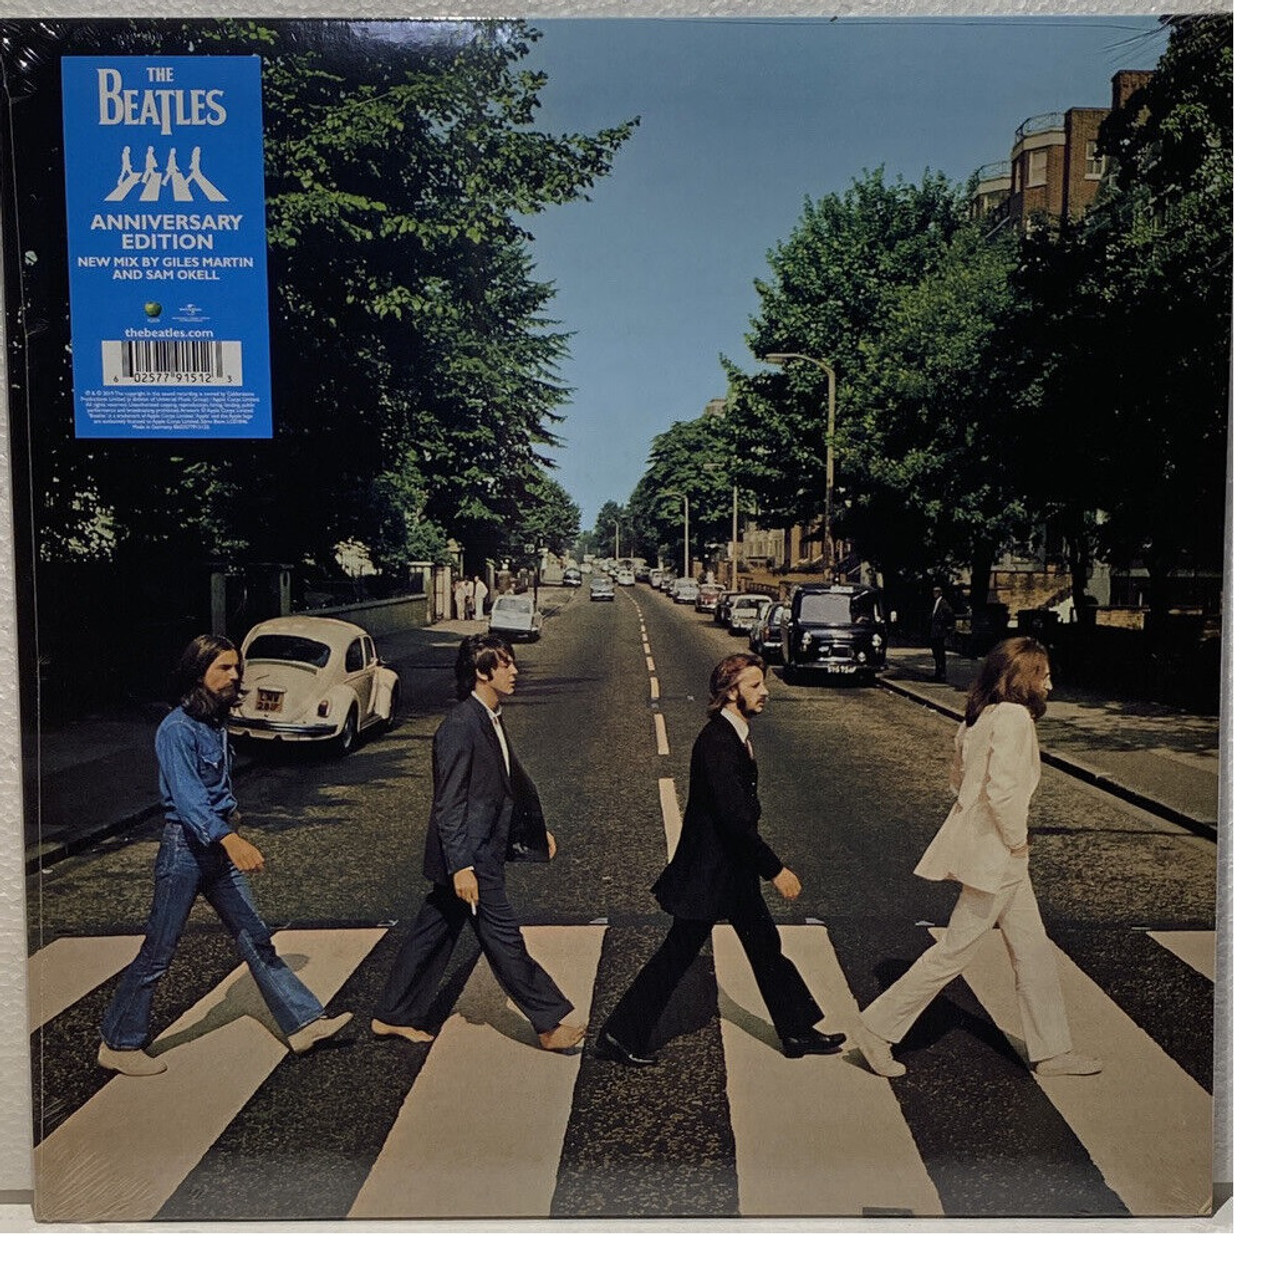 THE BEATLES REVISIT ABBEY ROAD WITH SPECIAL ANNIVERSARY RELEASES 